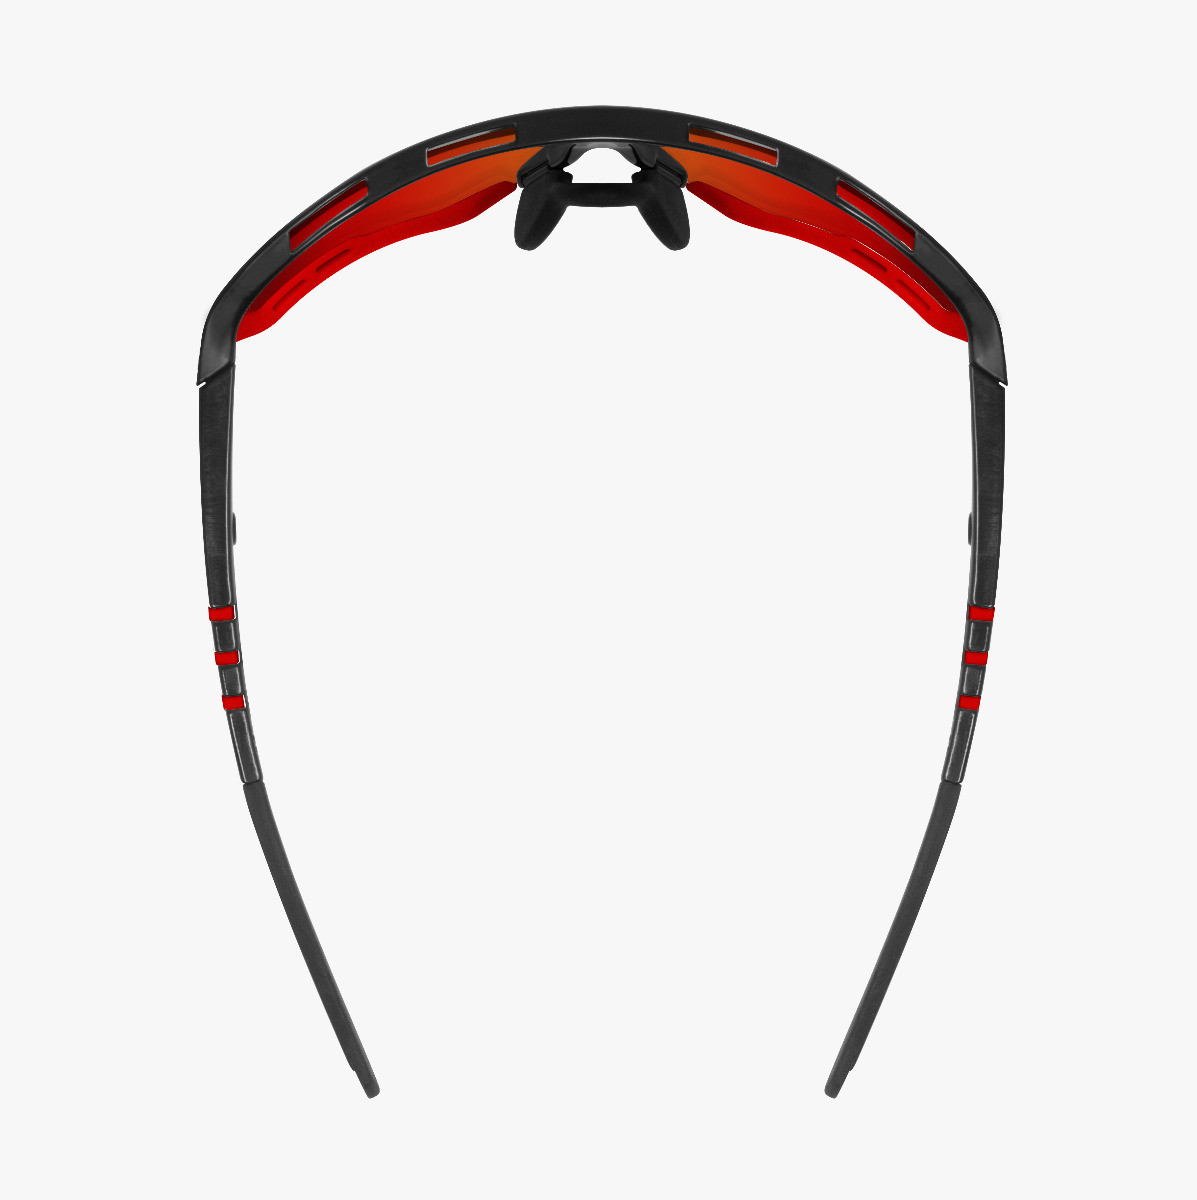 Scicon Sports | Aerocomfort Sport Cycling Performance Sunglasses - Black Gloss / Photocromatic Red - EY15160203